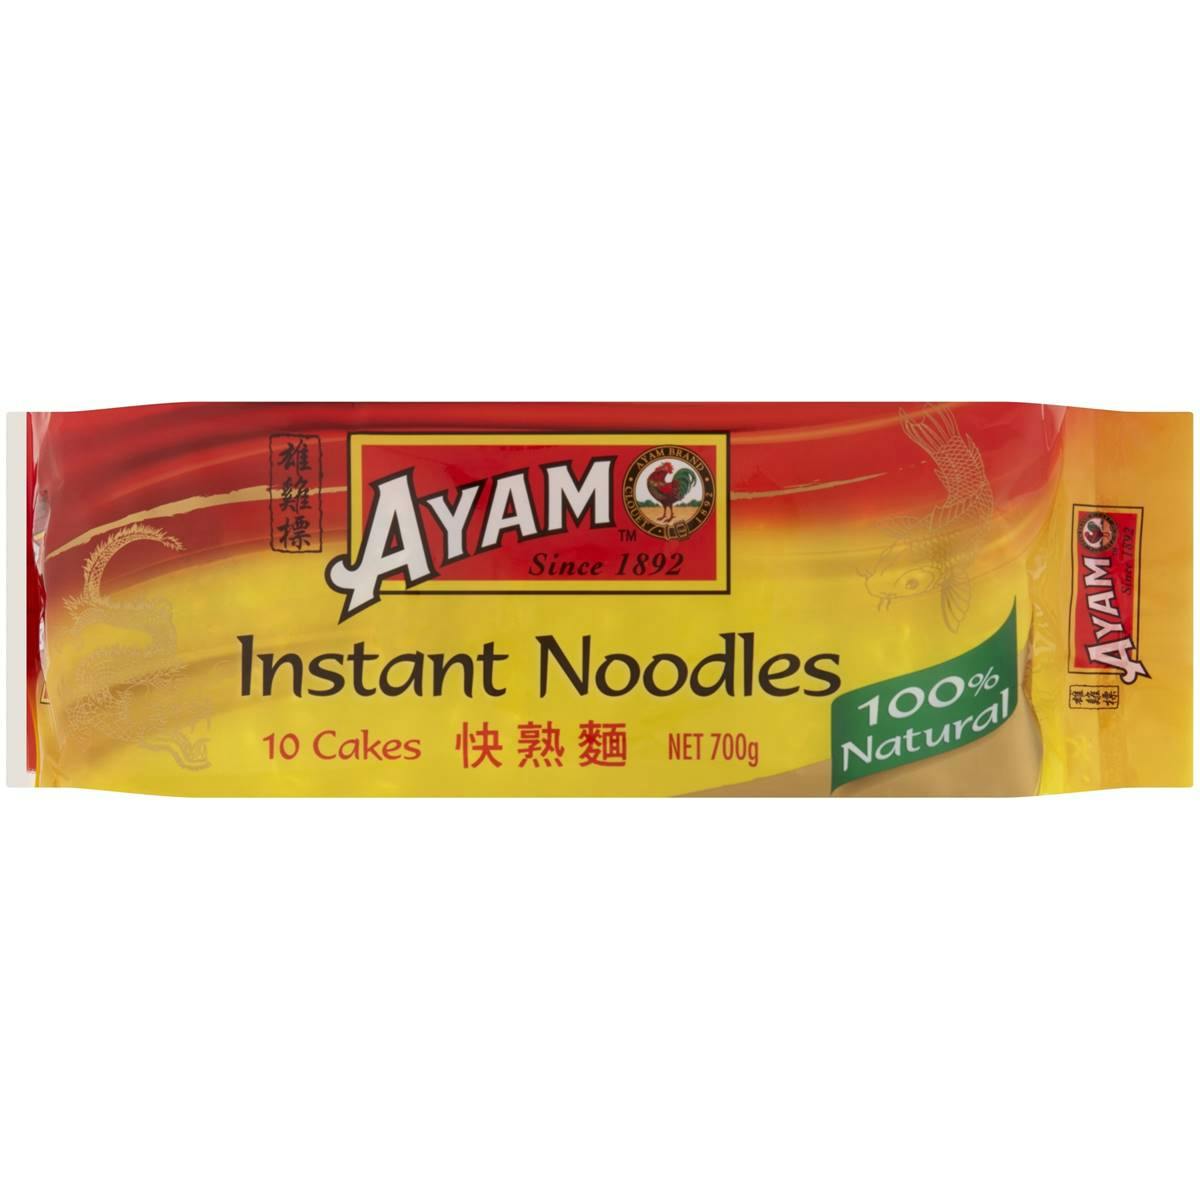 Ayam Instant Noodles 10 Cakes